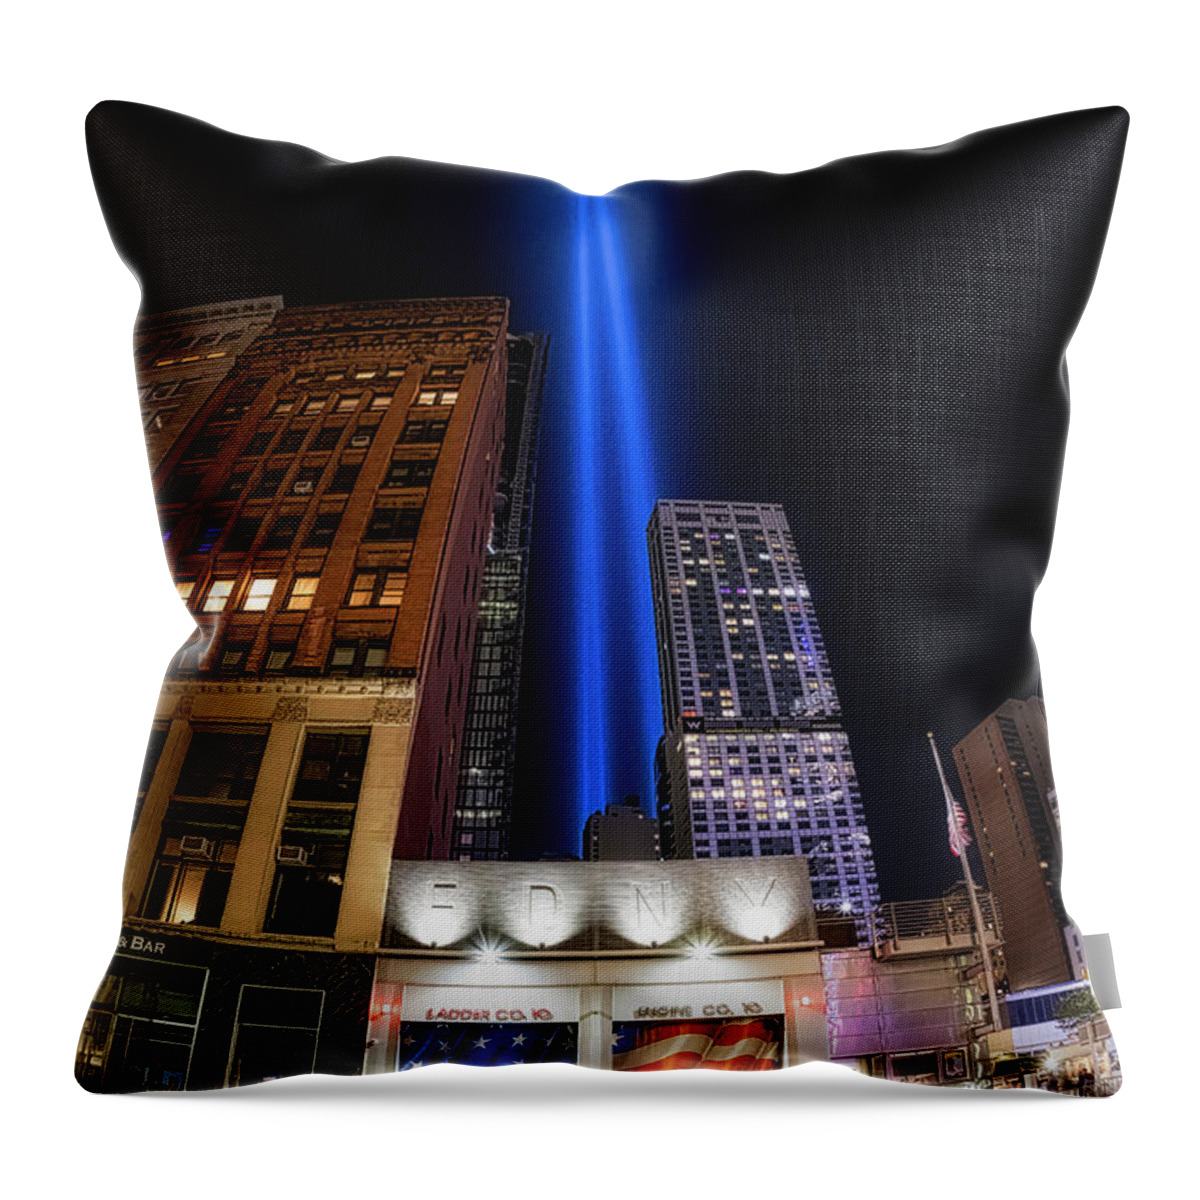 Fdny Throw Pillow featuring the photograph FDNY Ladder Co 10 by Susan Candelario